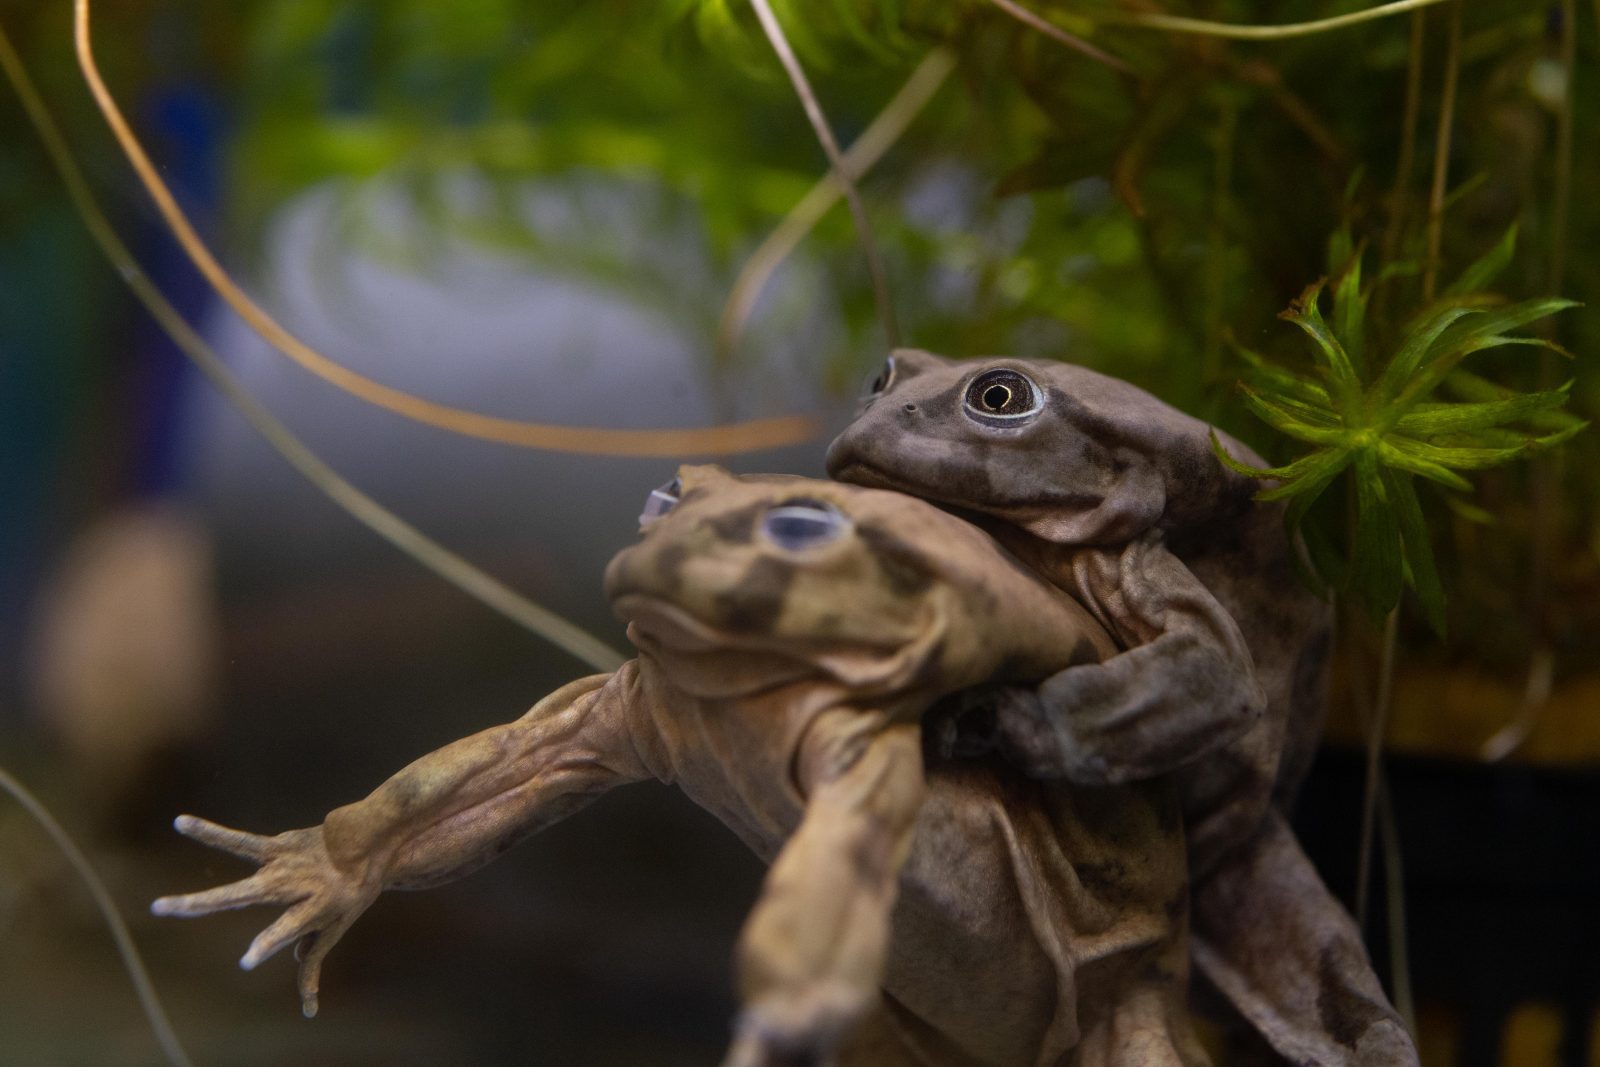 Rare &#8216;scrotum&#8217; frogs on the edge of extinction go on display at Chester Zoo, The Manc